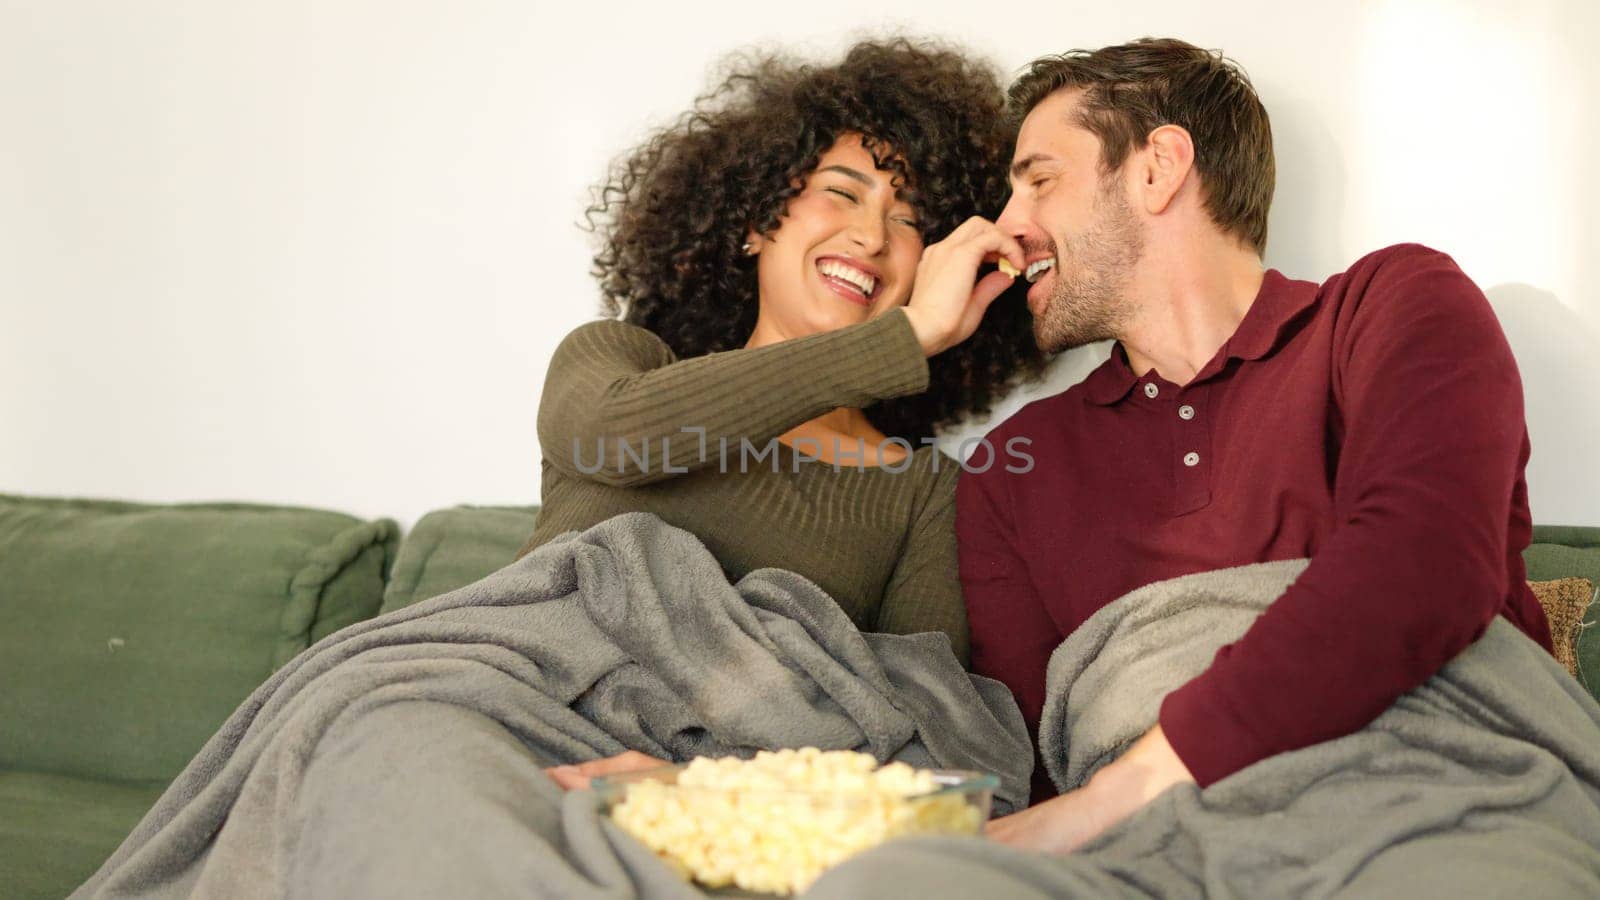 Woman putting popcorn in her boyfriend's mouth by ivanmoreno